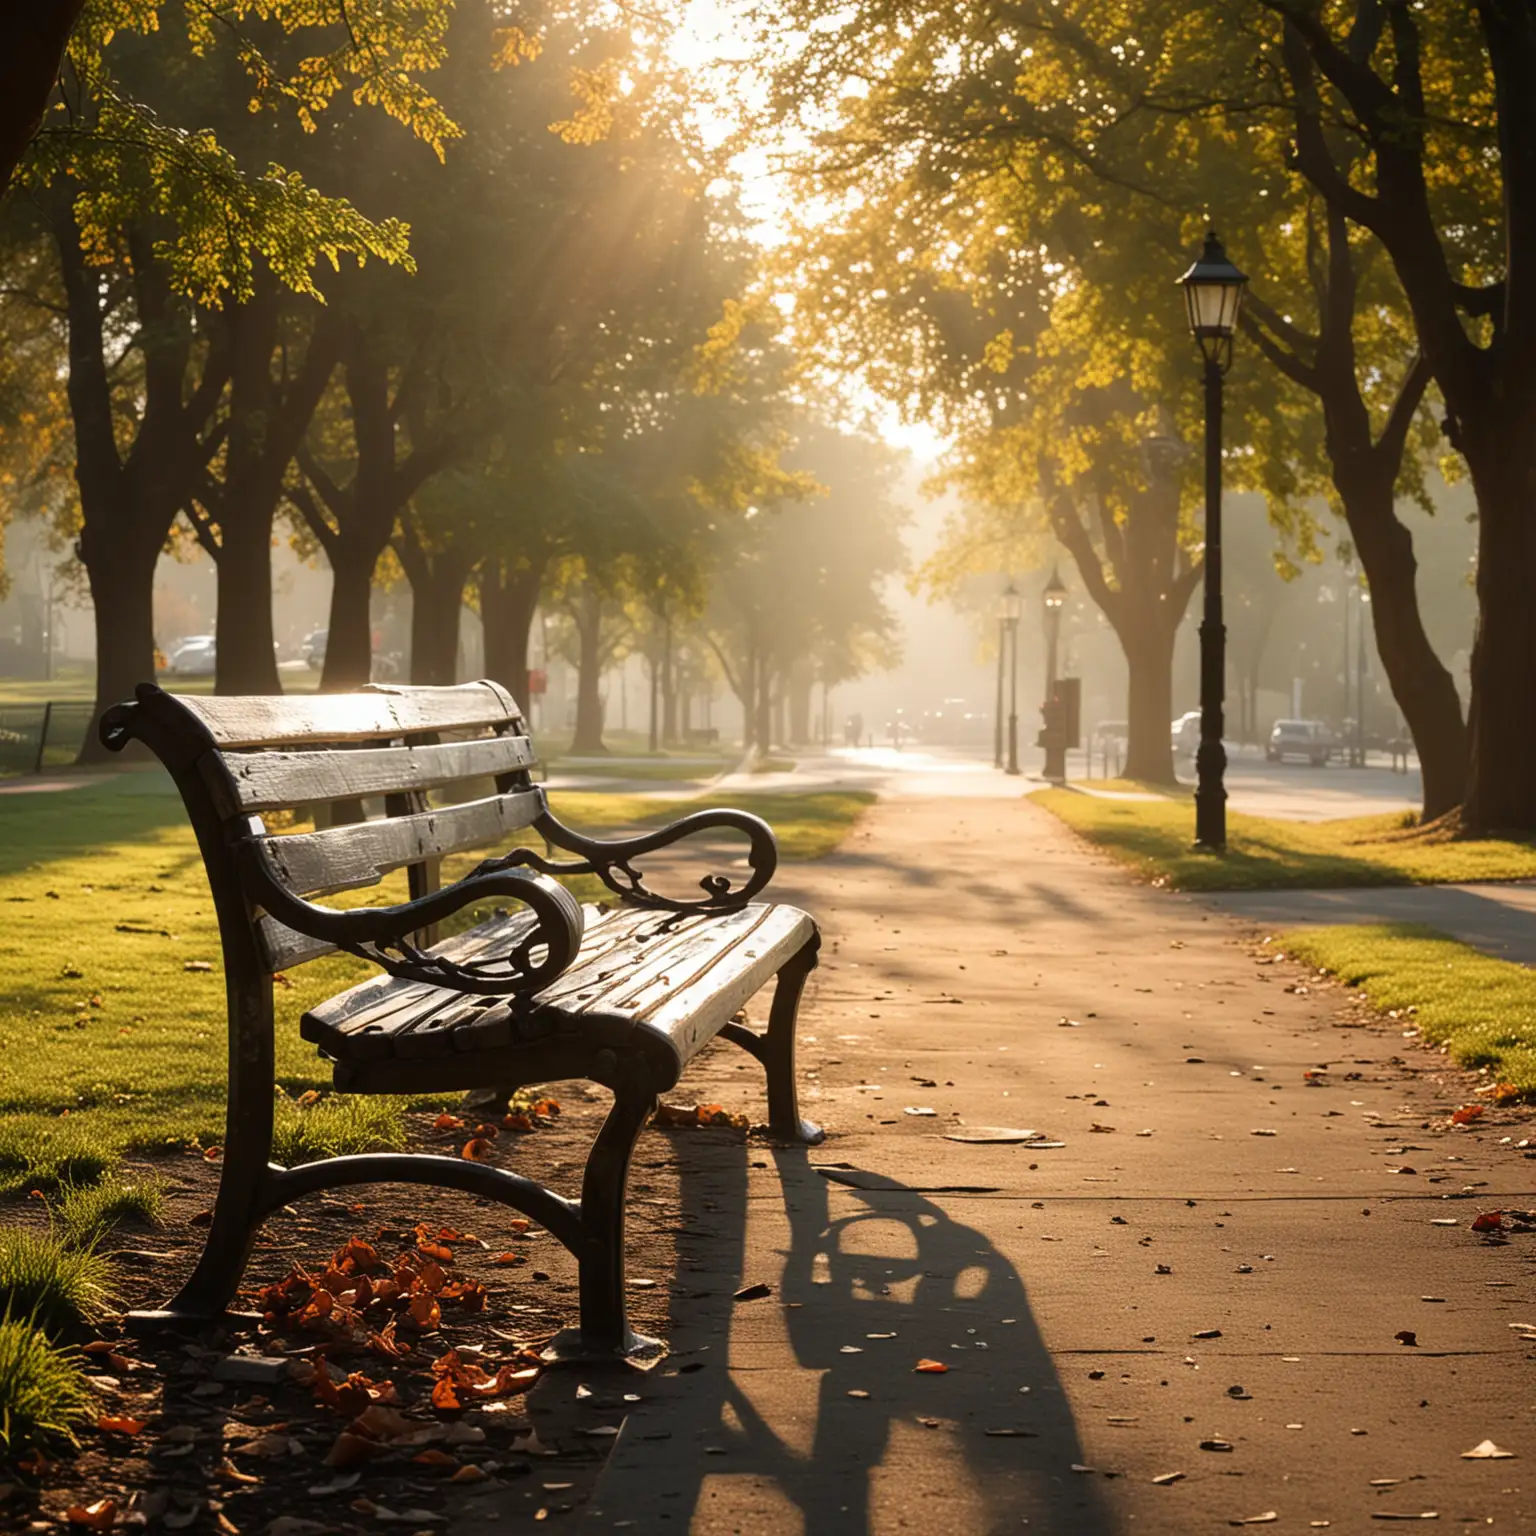 Morning Relaxation on Park Bench